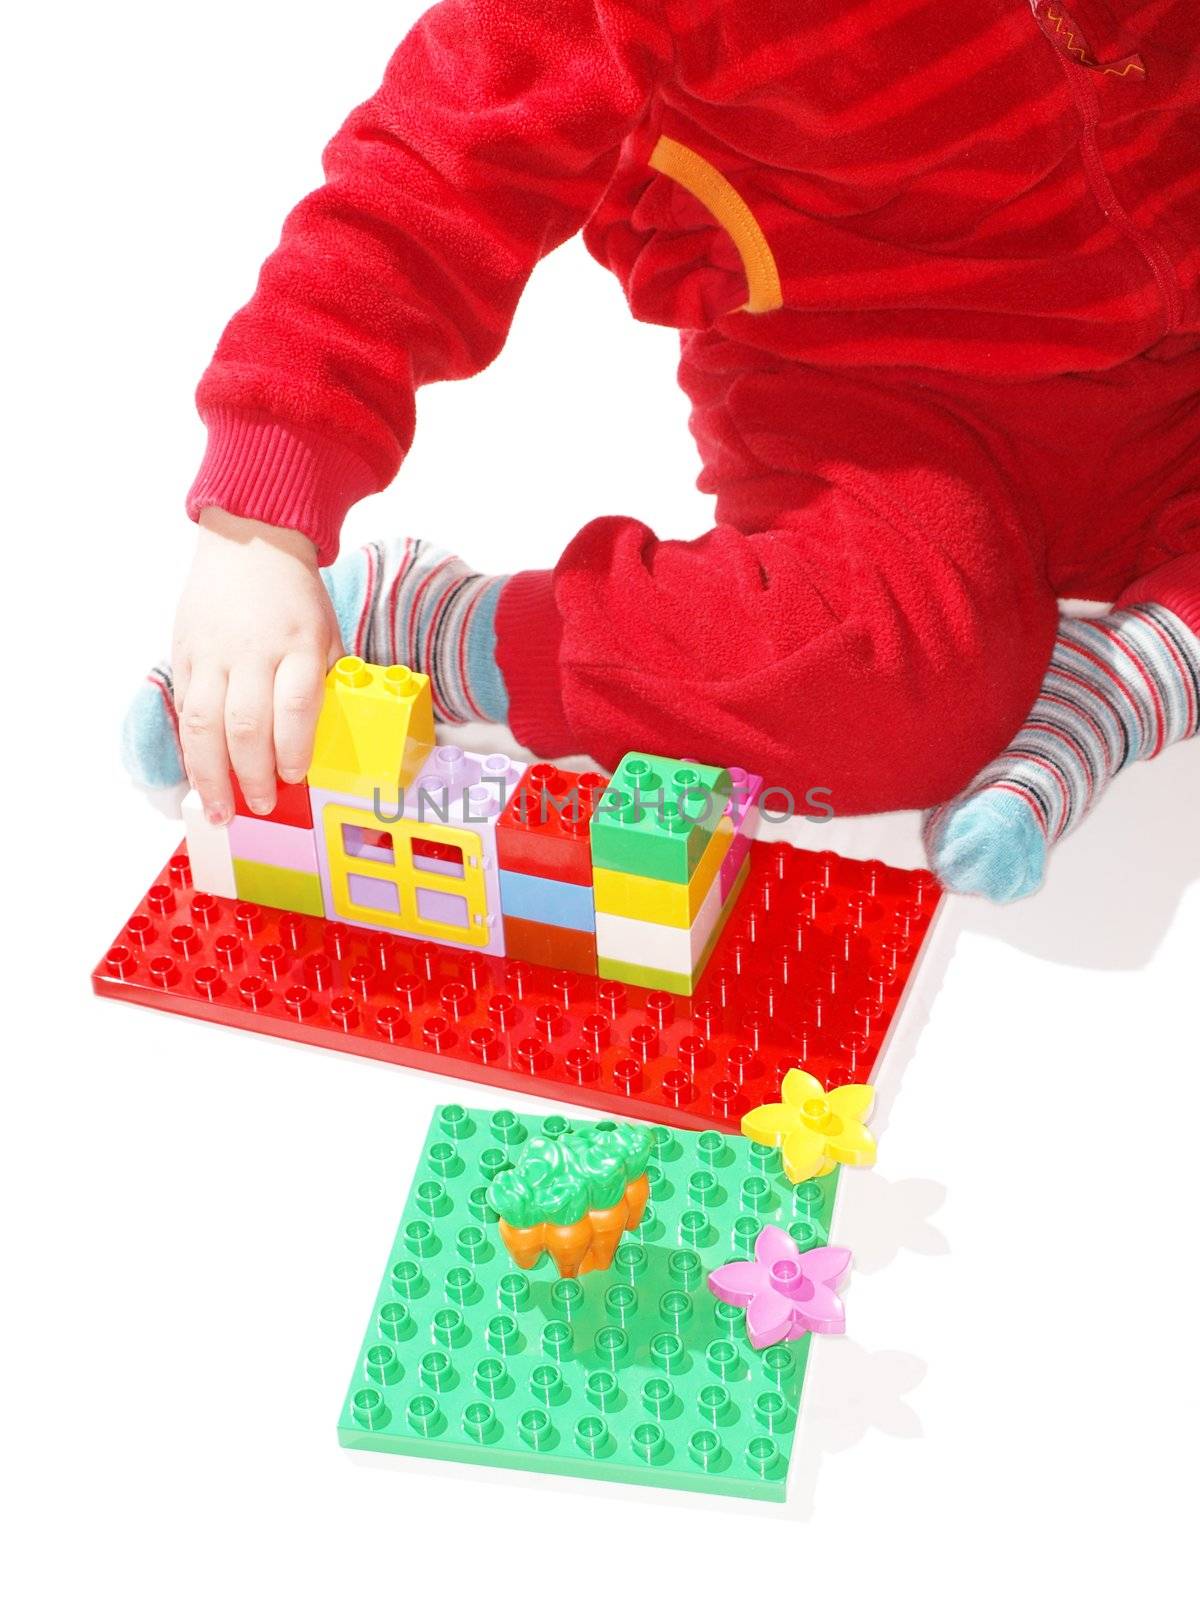 Unrecognizable kid in red, playing with colorful plastic quick build toys